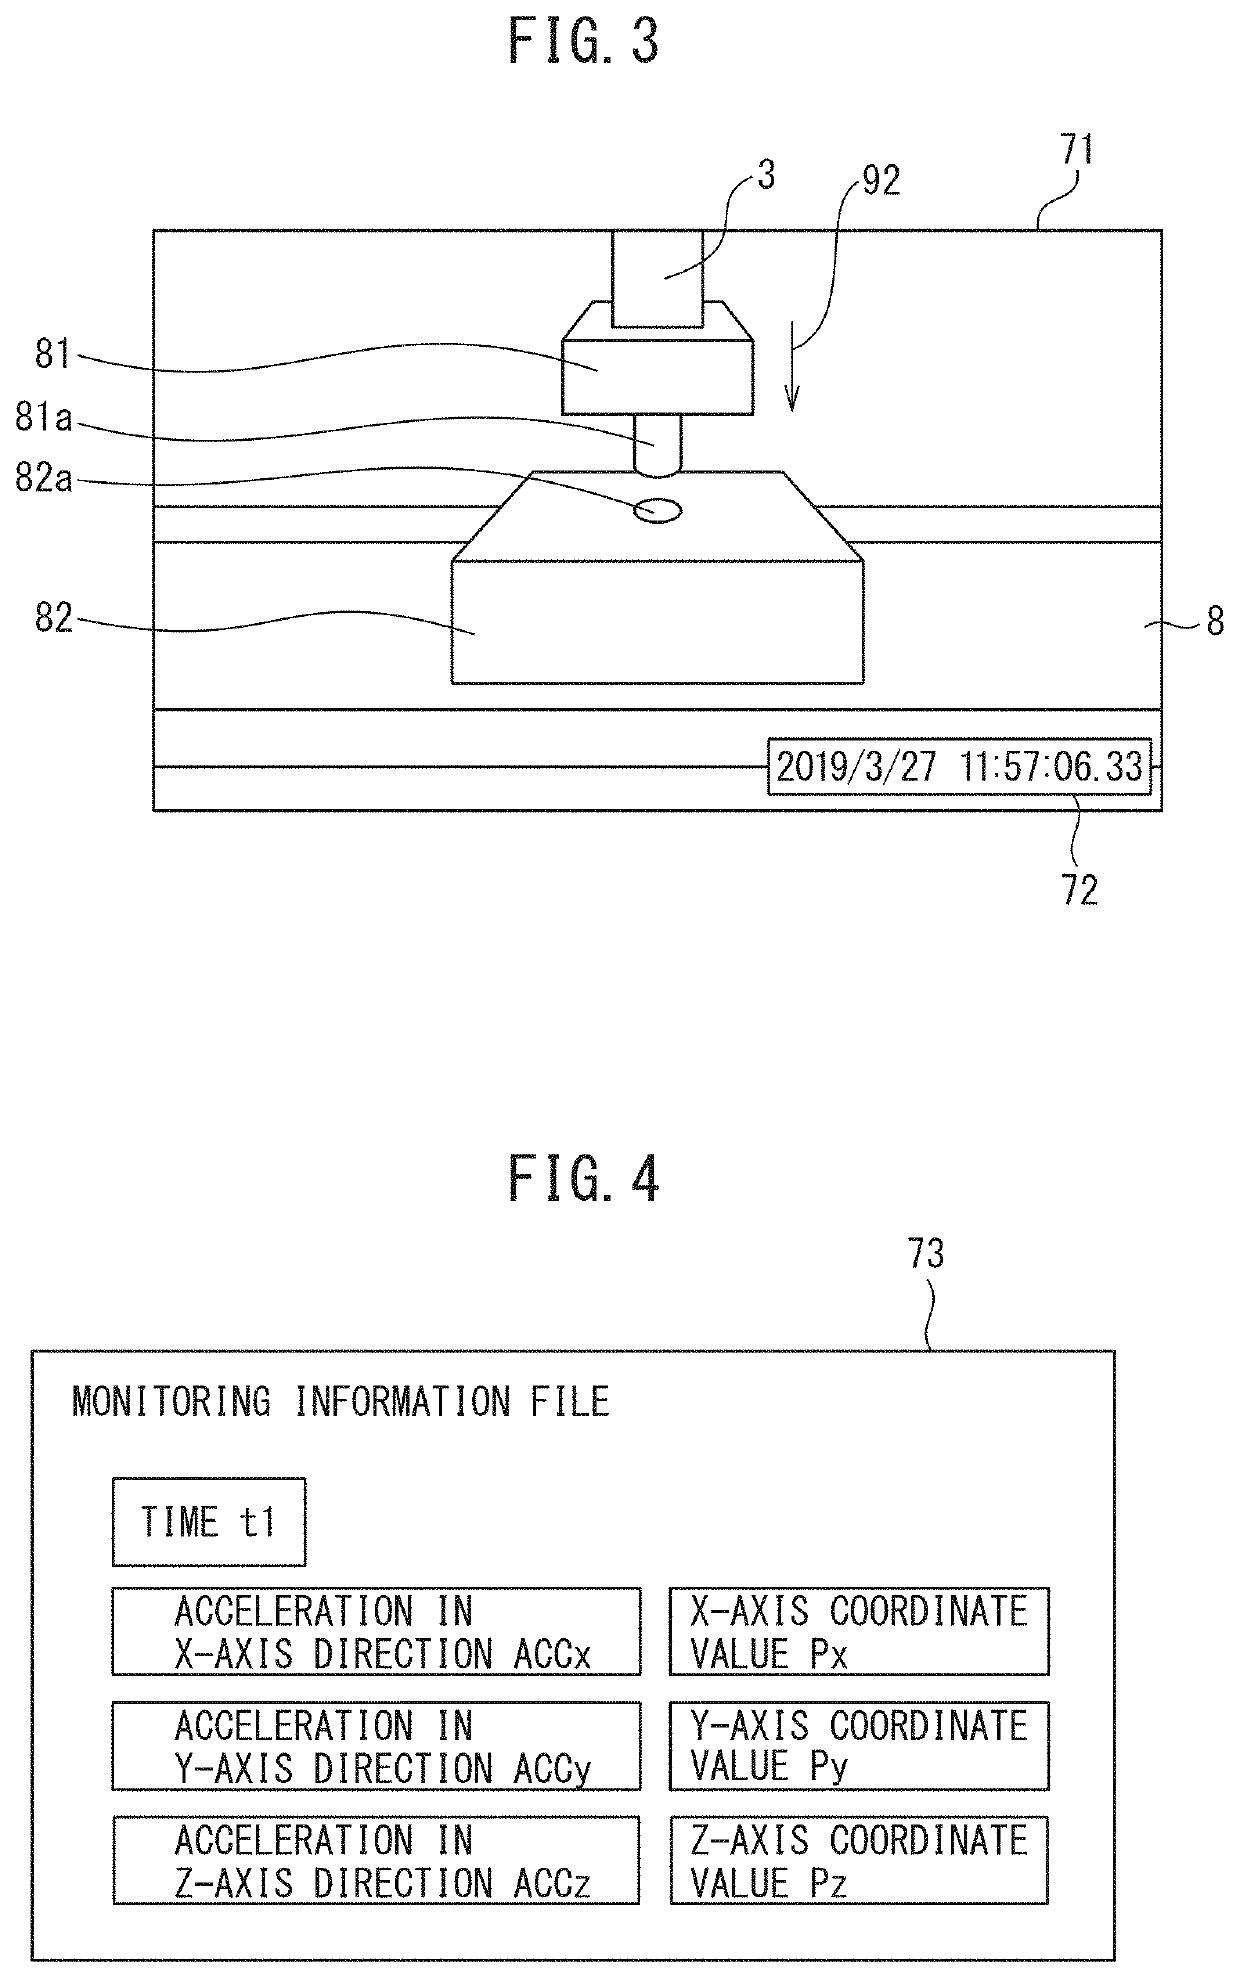 Monitor device provided with camera for capturing motion image of motion of robot device